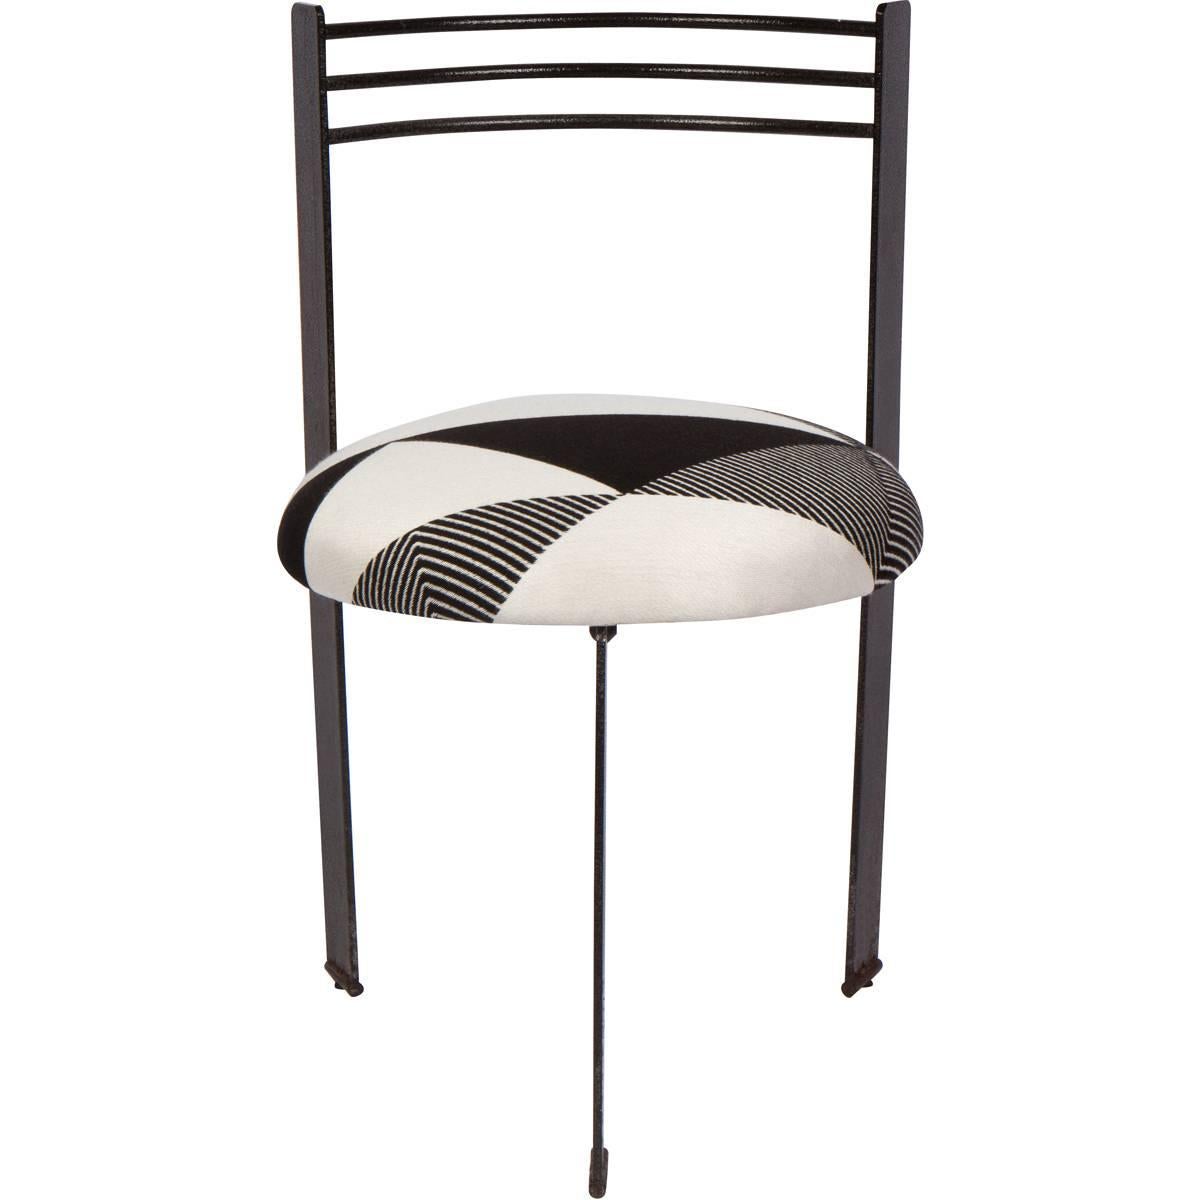 Chic set of four metal dining chairs inspired by the Memphis style, 1980s. The chairs are quite heavy and have a slightly textured, deep charcoal finish on them. They have been newly re-upholstered in a high end geometric black and white Kirby